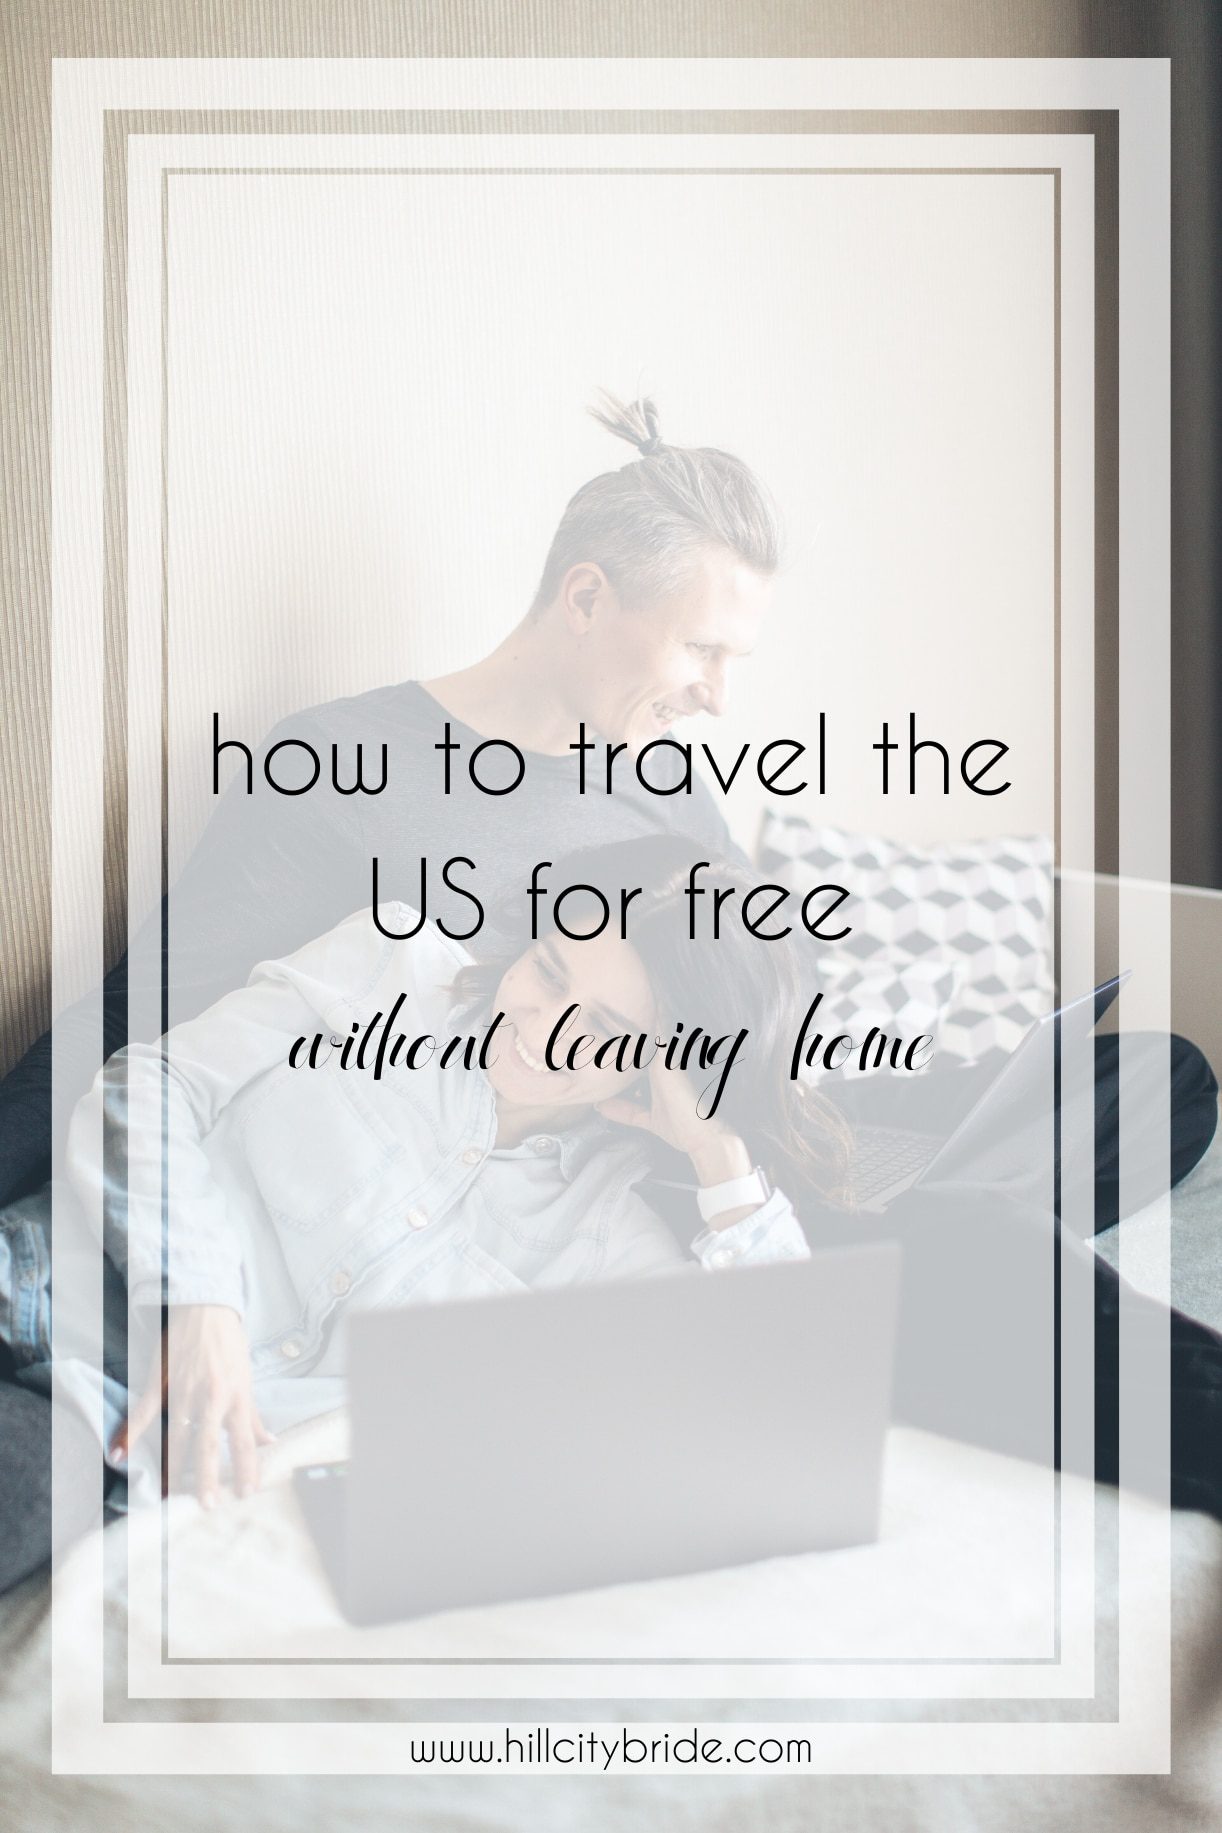 How to Travel the US for Free During Quarantine When Will We Be Able to Travel Again